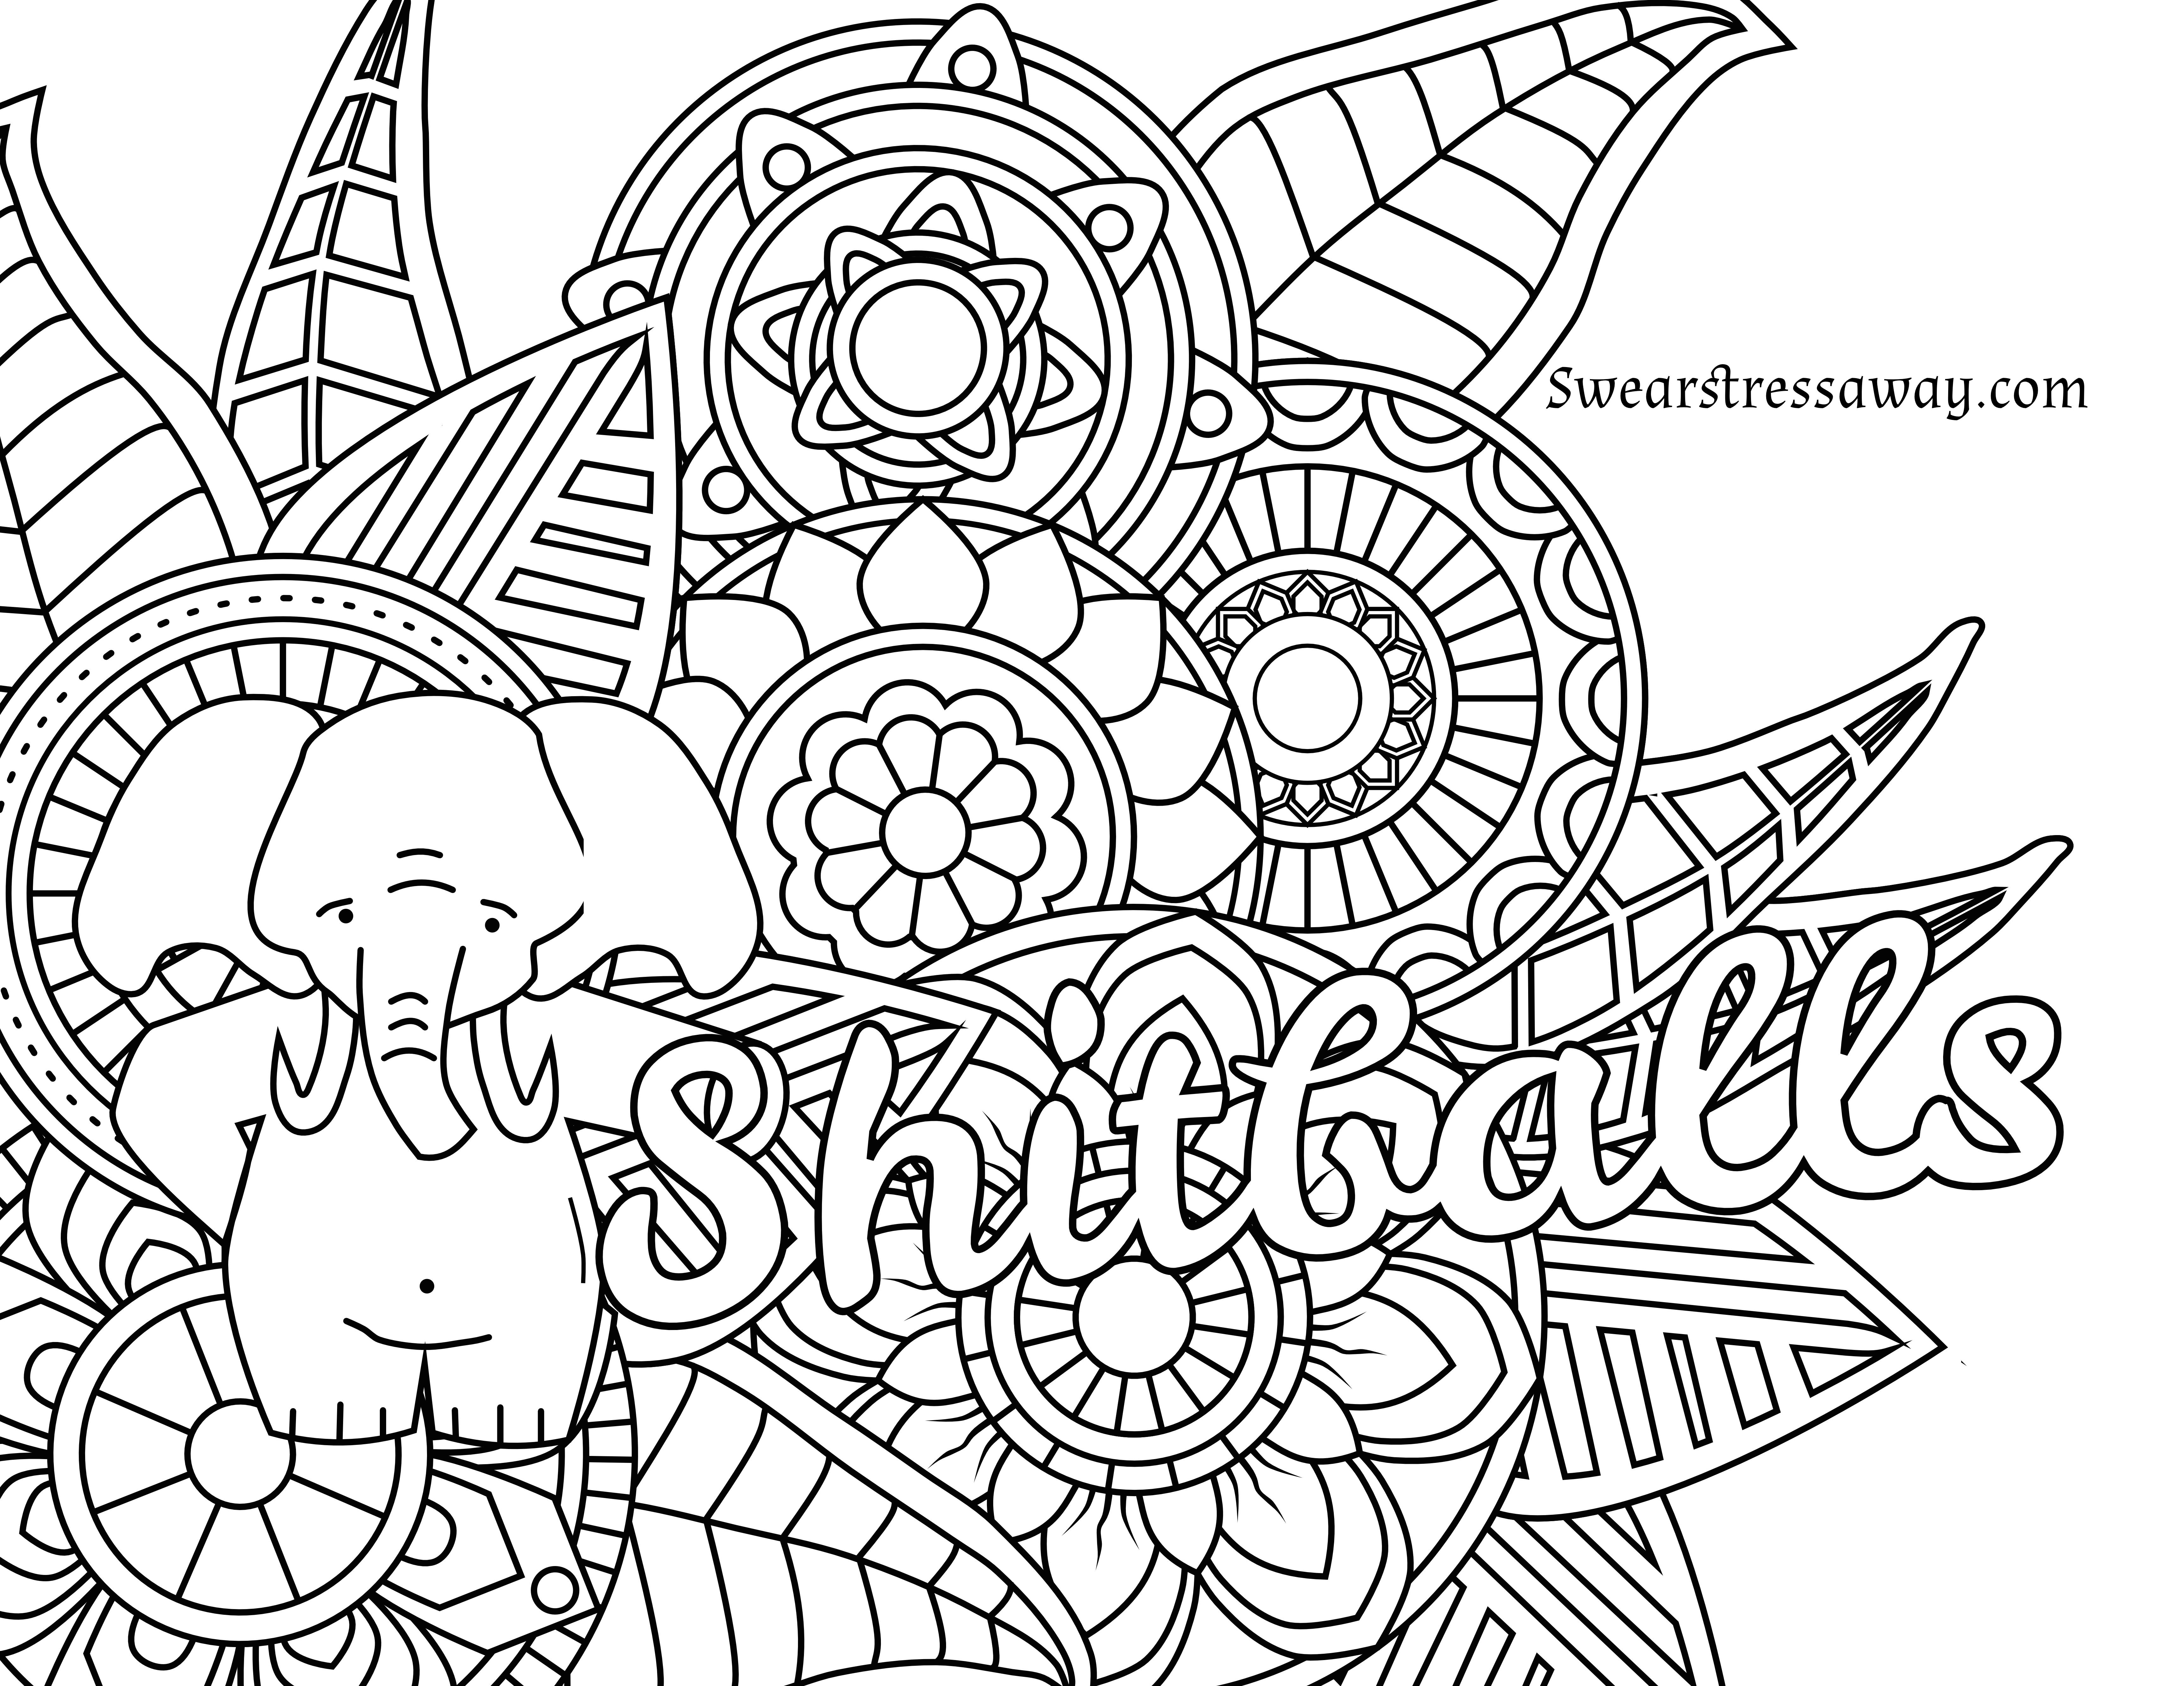 Quiver App Coloring Pages at GetDrawings   Free download